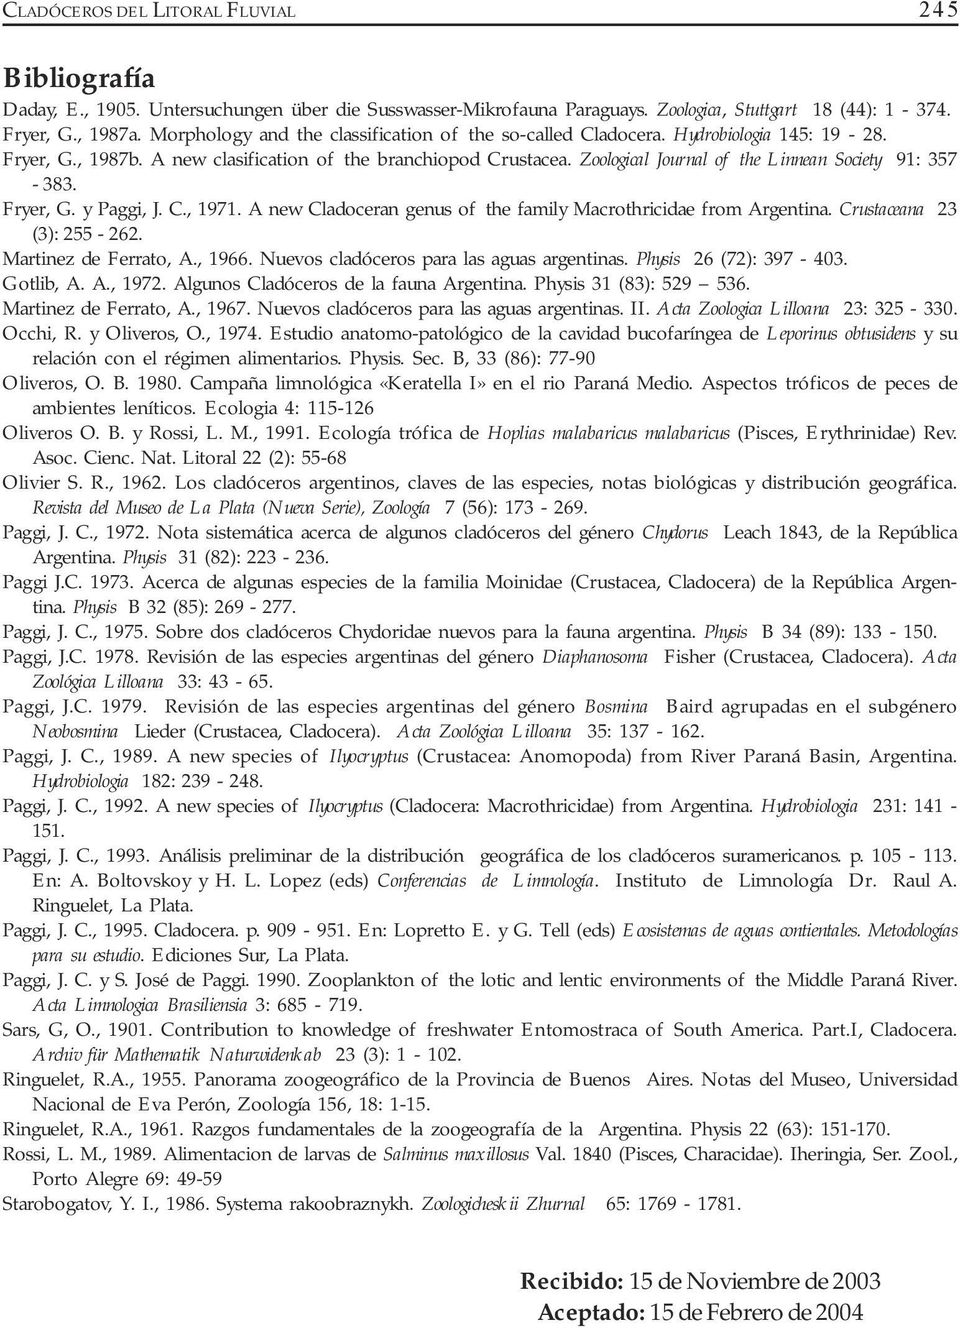 Zoological Journal of the Linnean Society 91: 357-383. Fryer, G. y Paggi, J. C., 1971. A new Cladoceran genus of the family Macrothricidae from Argentina. Crustaceana 23 (3): 255-262.